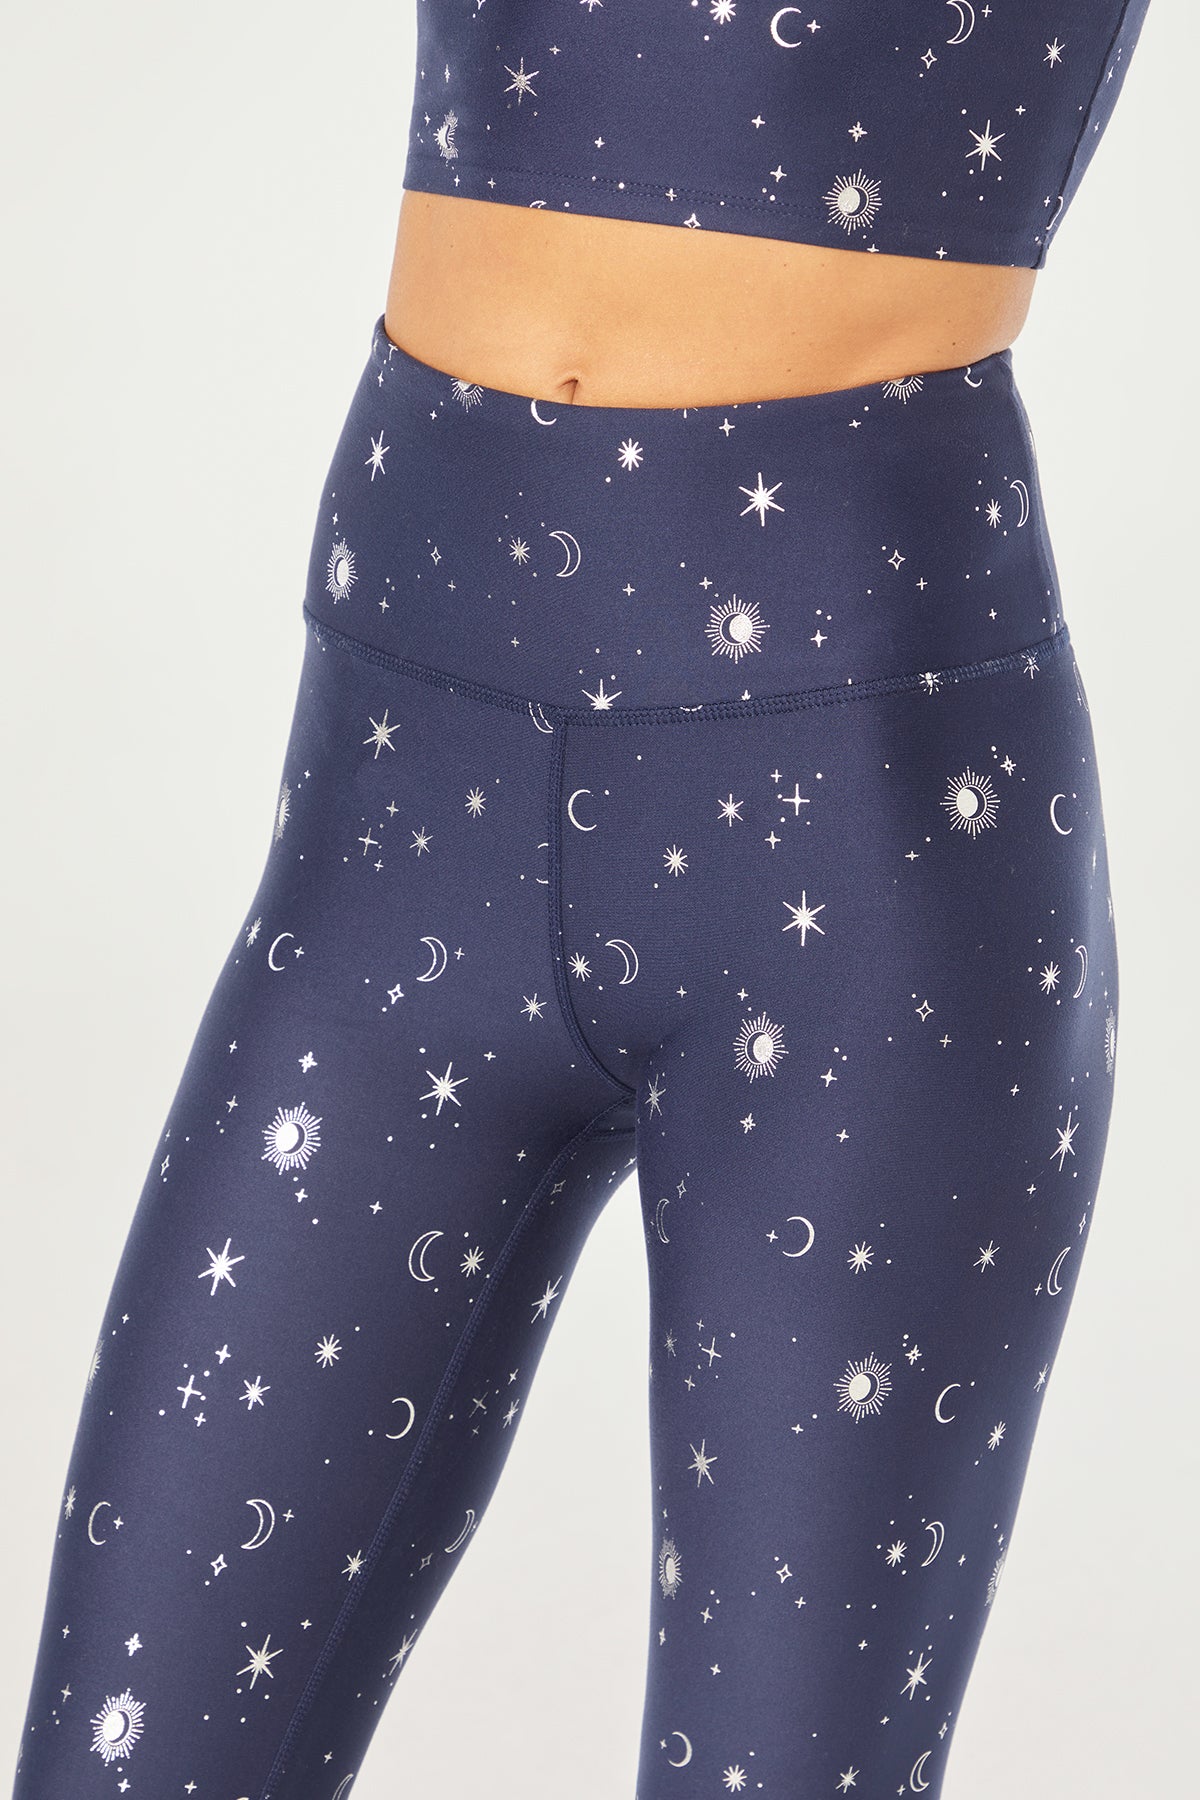 Marley Legging (Silver Foil Night Sky Mixed Moons)